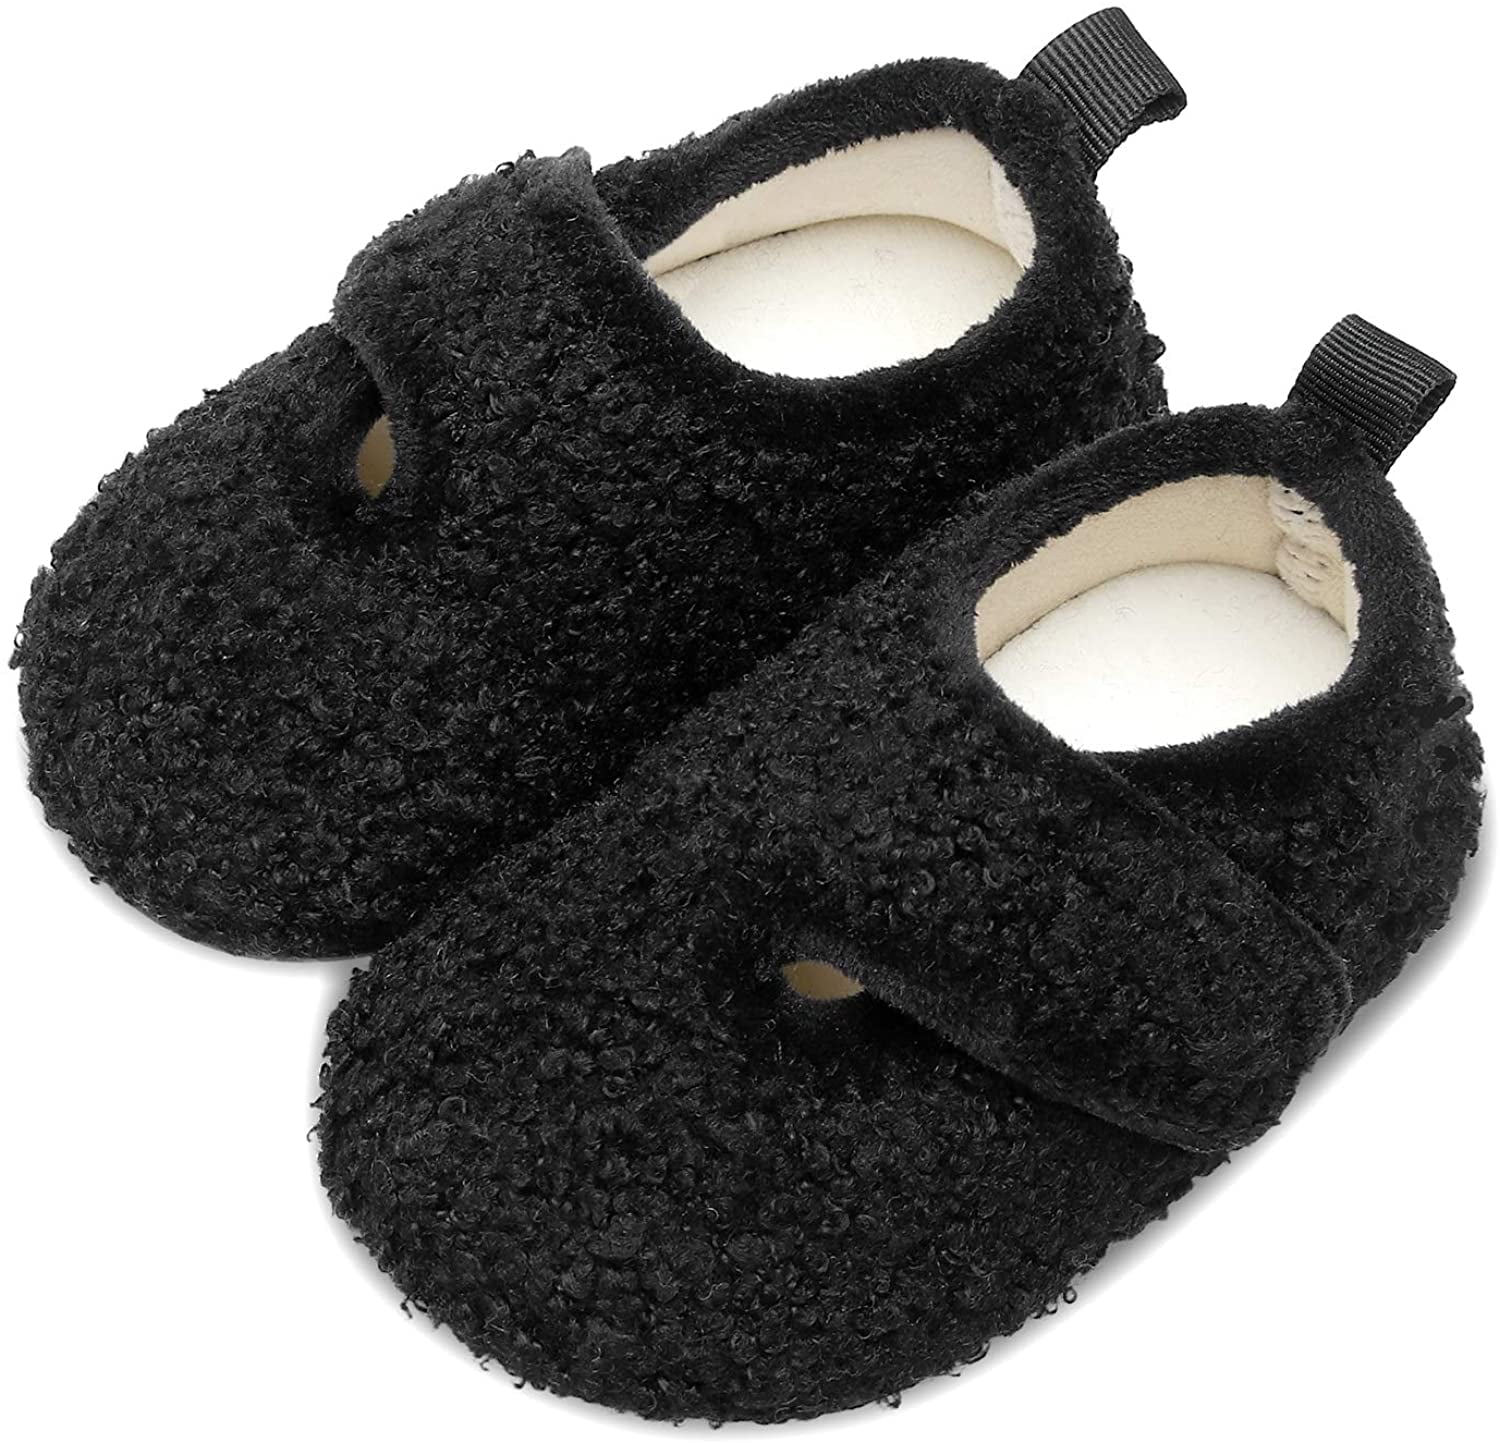 Comfort Boys Girls Wool Like House Slippers Kids Light Weight Anti-Skid Shoes with Adjustable Hook and Loop 